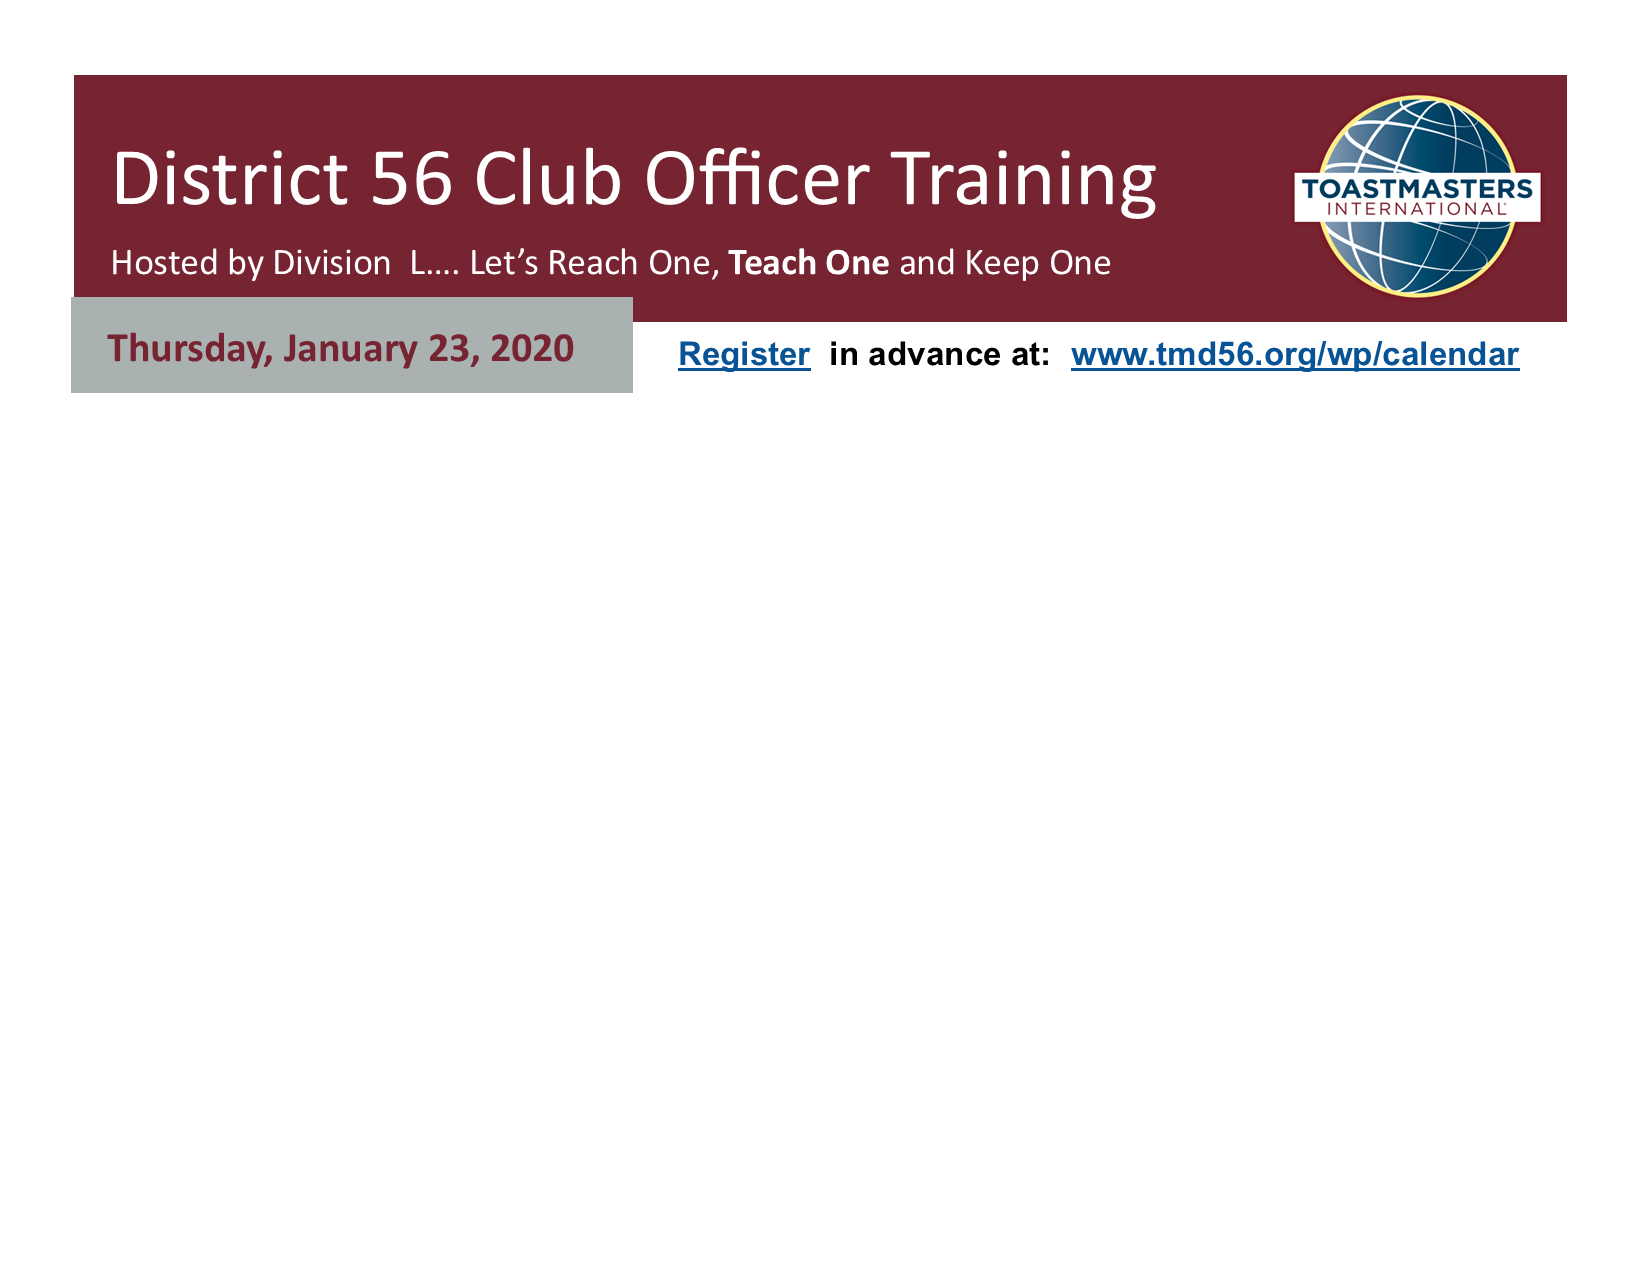 District 56 Division L Club Officer Training -The Woodlands (6pm-8:45pm)